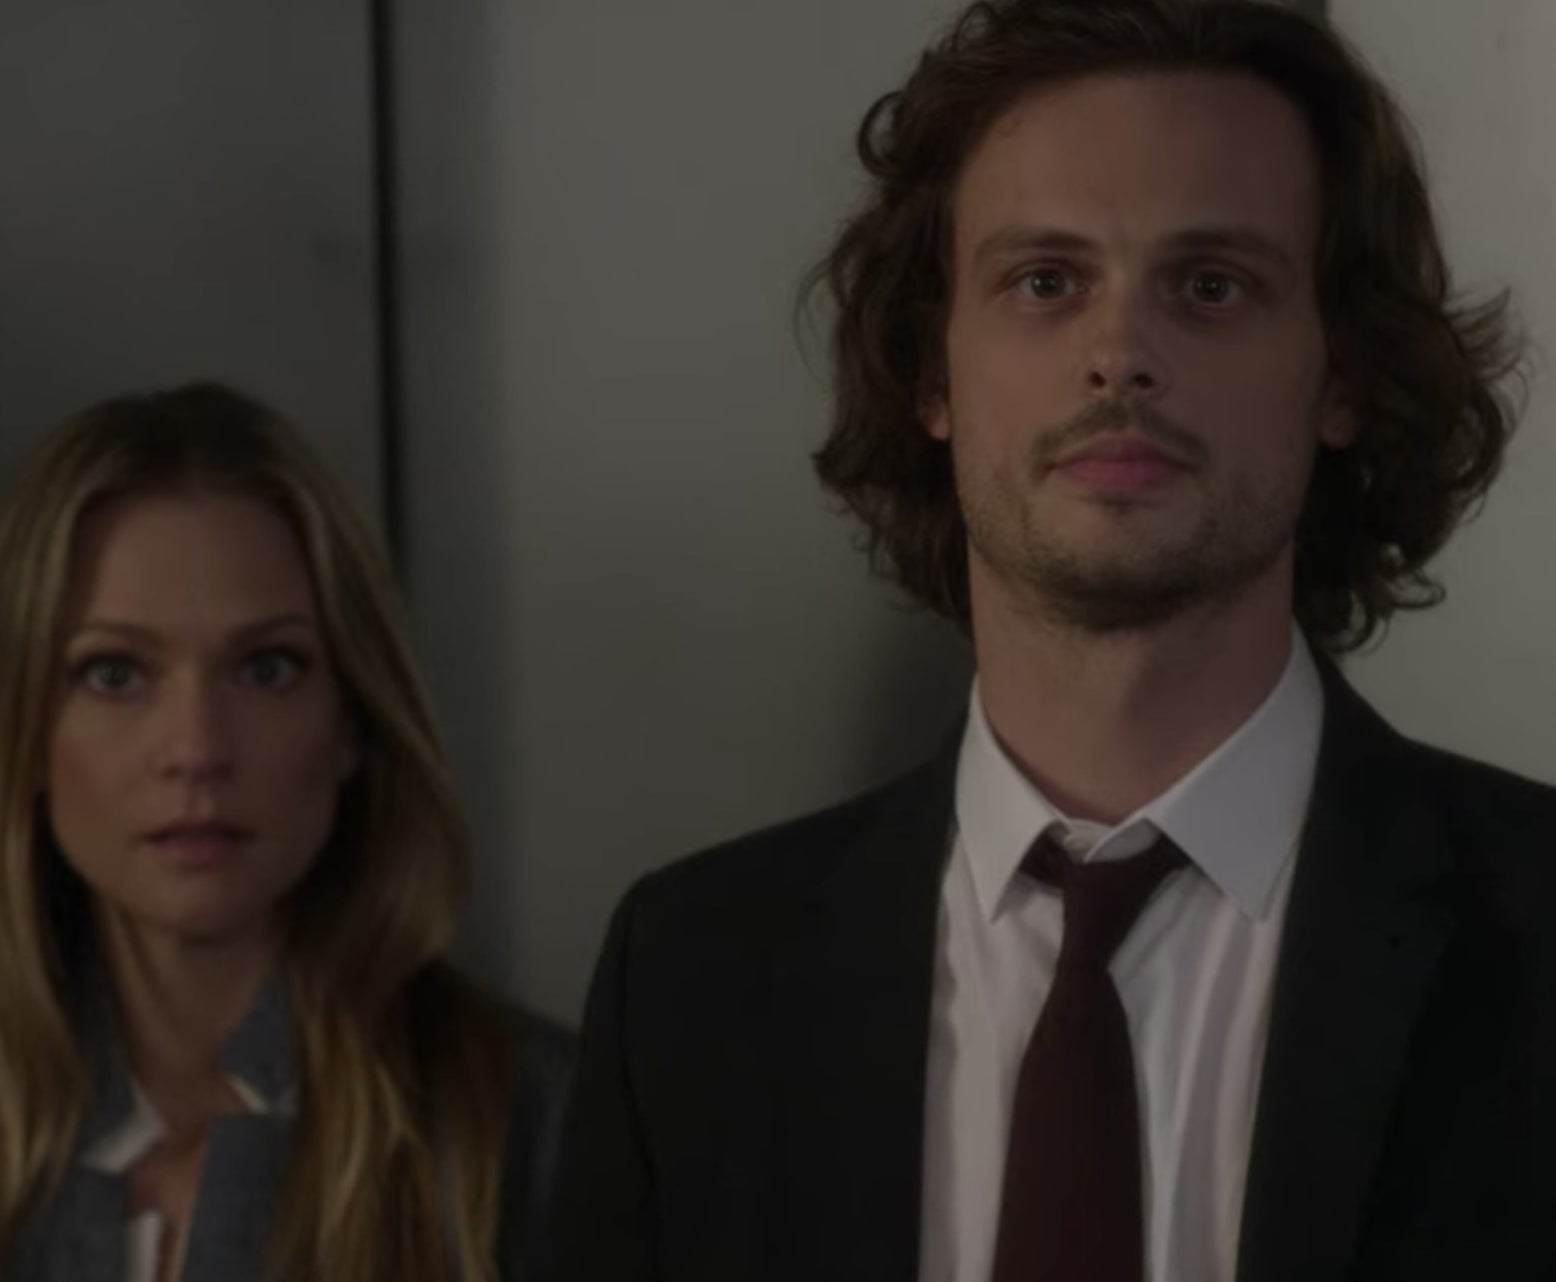 Spencer Reid from Criminal Minds standing next to a person